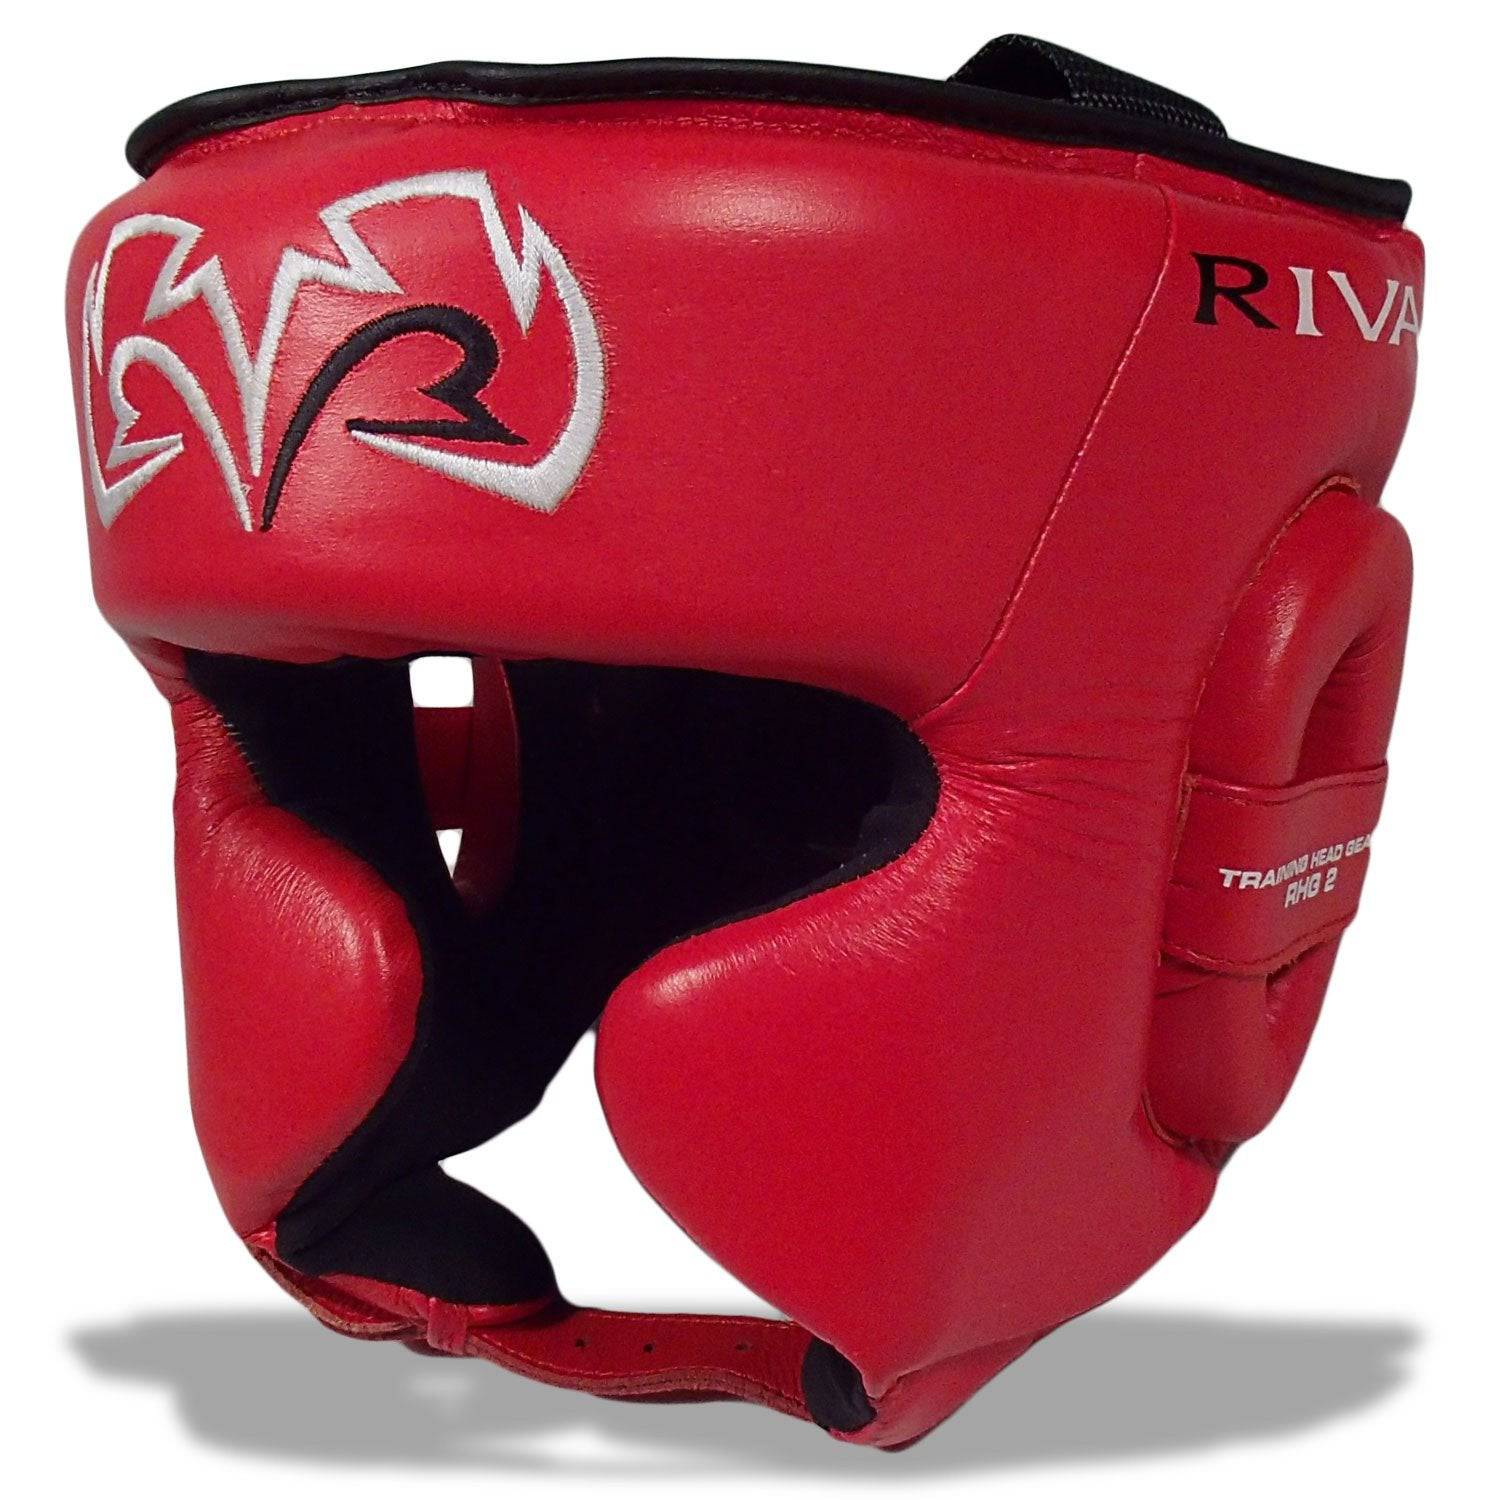 Rival | Training Headgear - RHG2 - XTC Fitness - Exercise Equipment Superstore - Canada - Head Gear